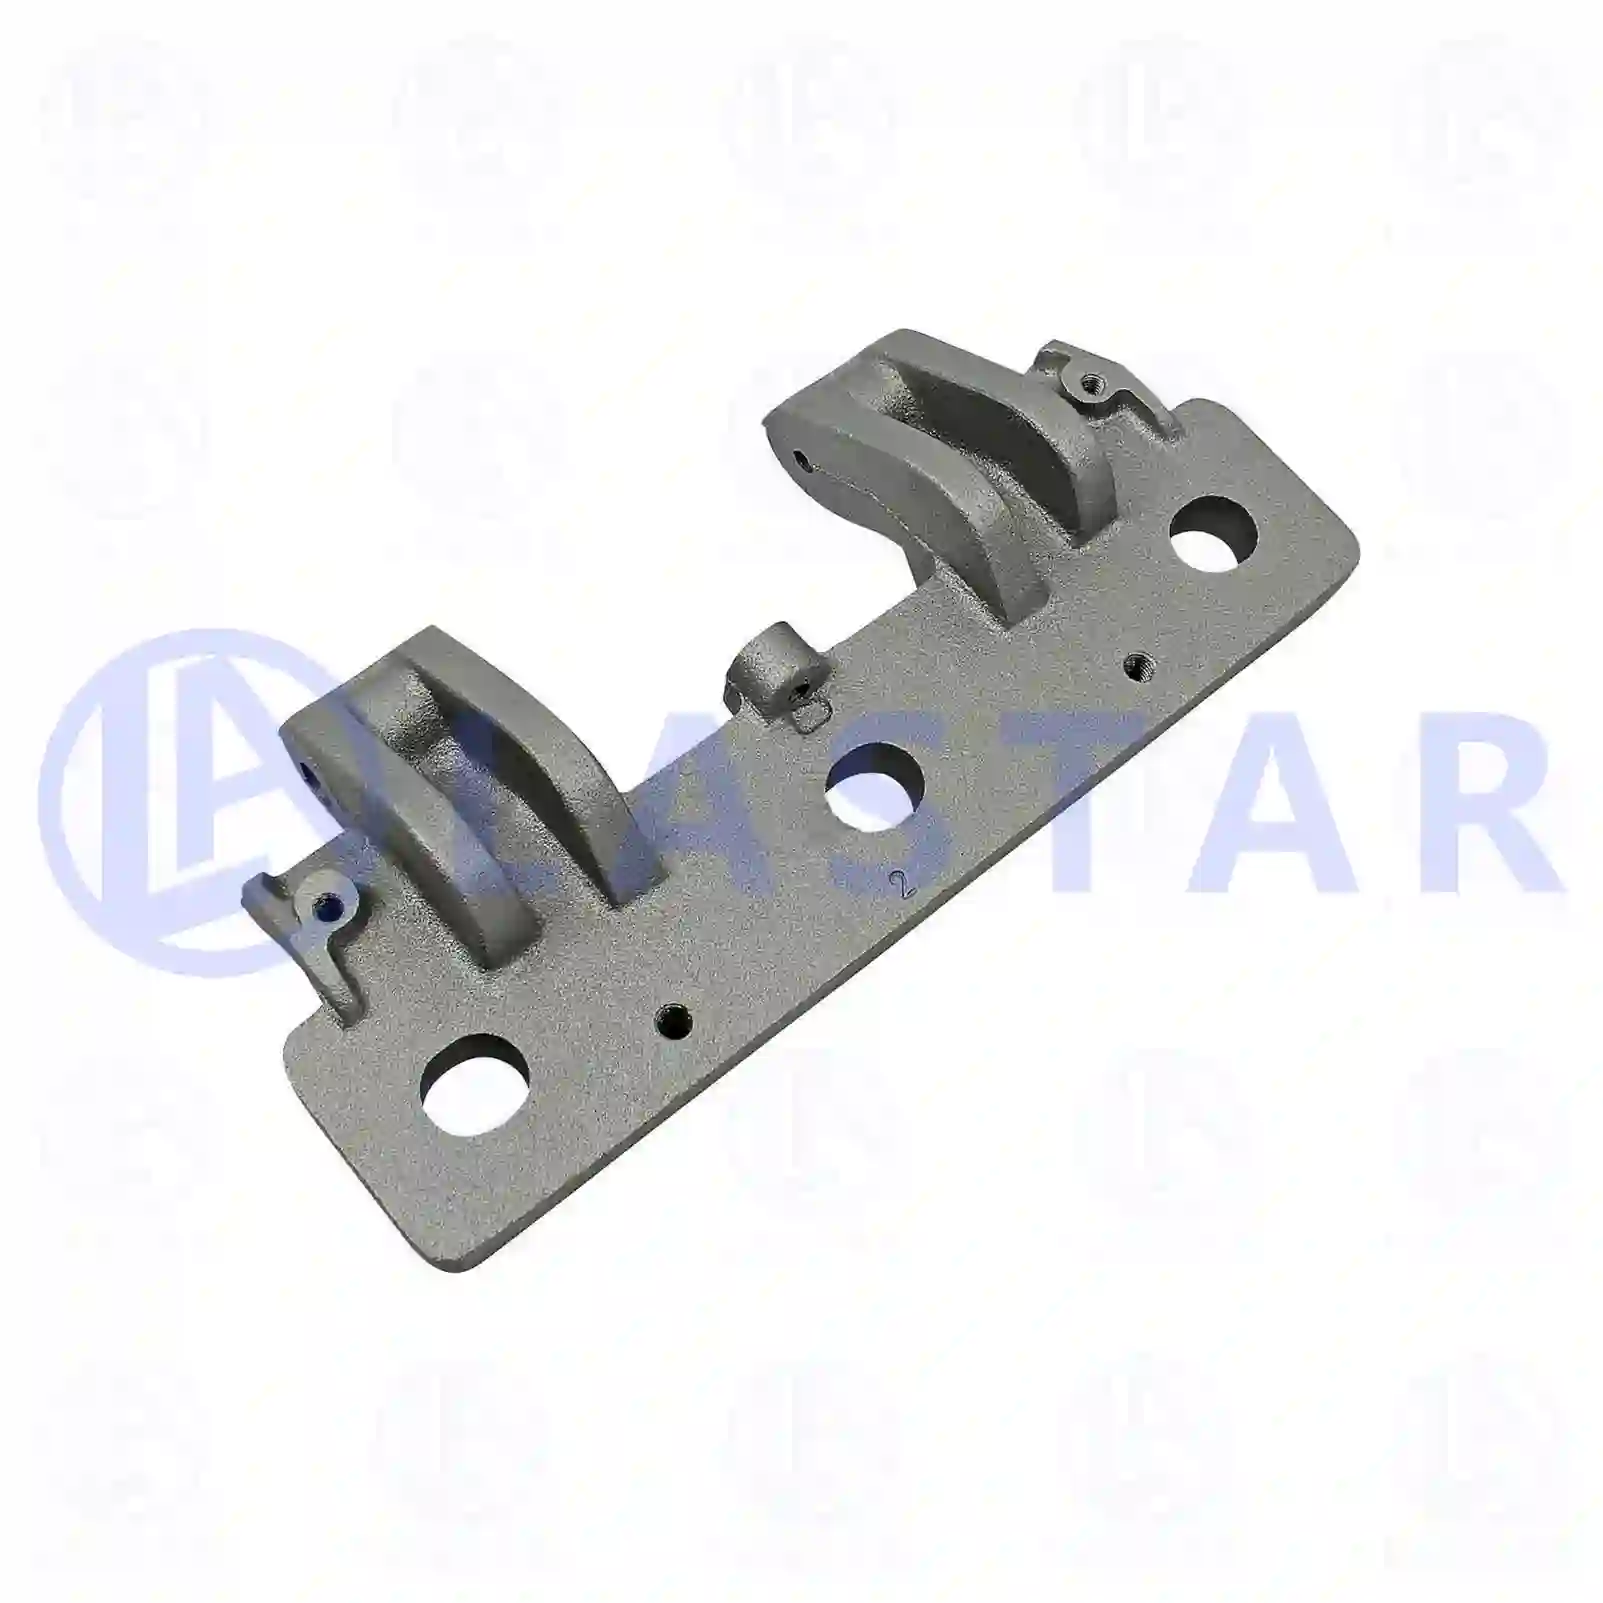 Hinge, front grill, without rubber buffer, 77719750, 1336467, 1434957, 1672923, 1735004 ||  77719750 Lastar Spare Part | Truck Spare Parts, Auotomotive Spare Parts Hinge, front grill, without rubber buffer, 77719750, 1336467, 1434957, 1672923, 1735004 ||  77719750 Lastar Spare Part | Truck Spare Parts, Auotomotive Spare Parts